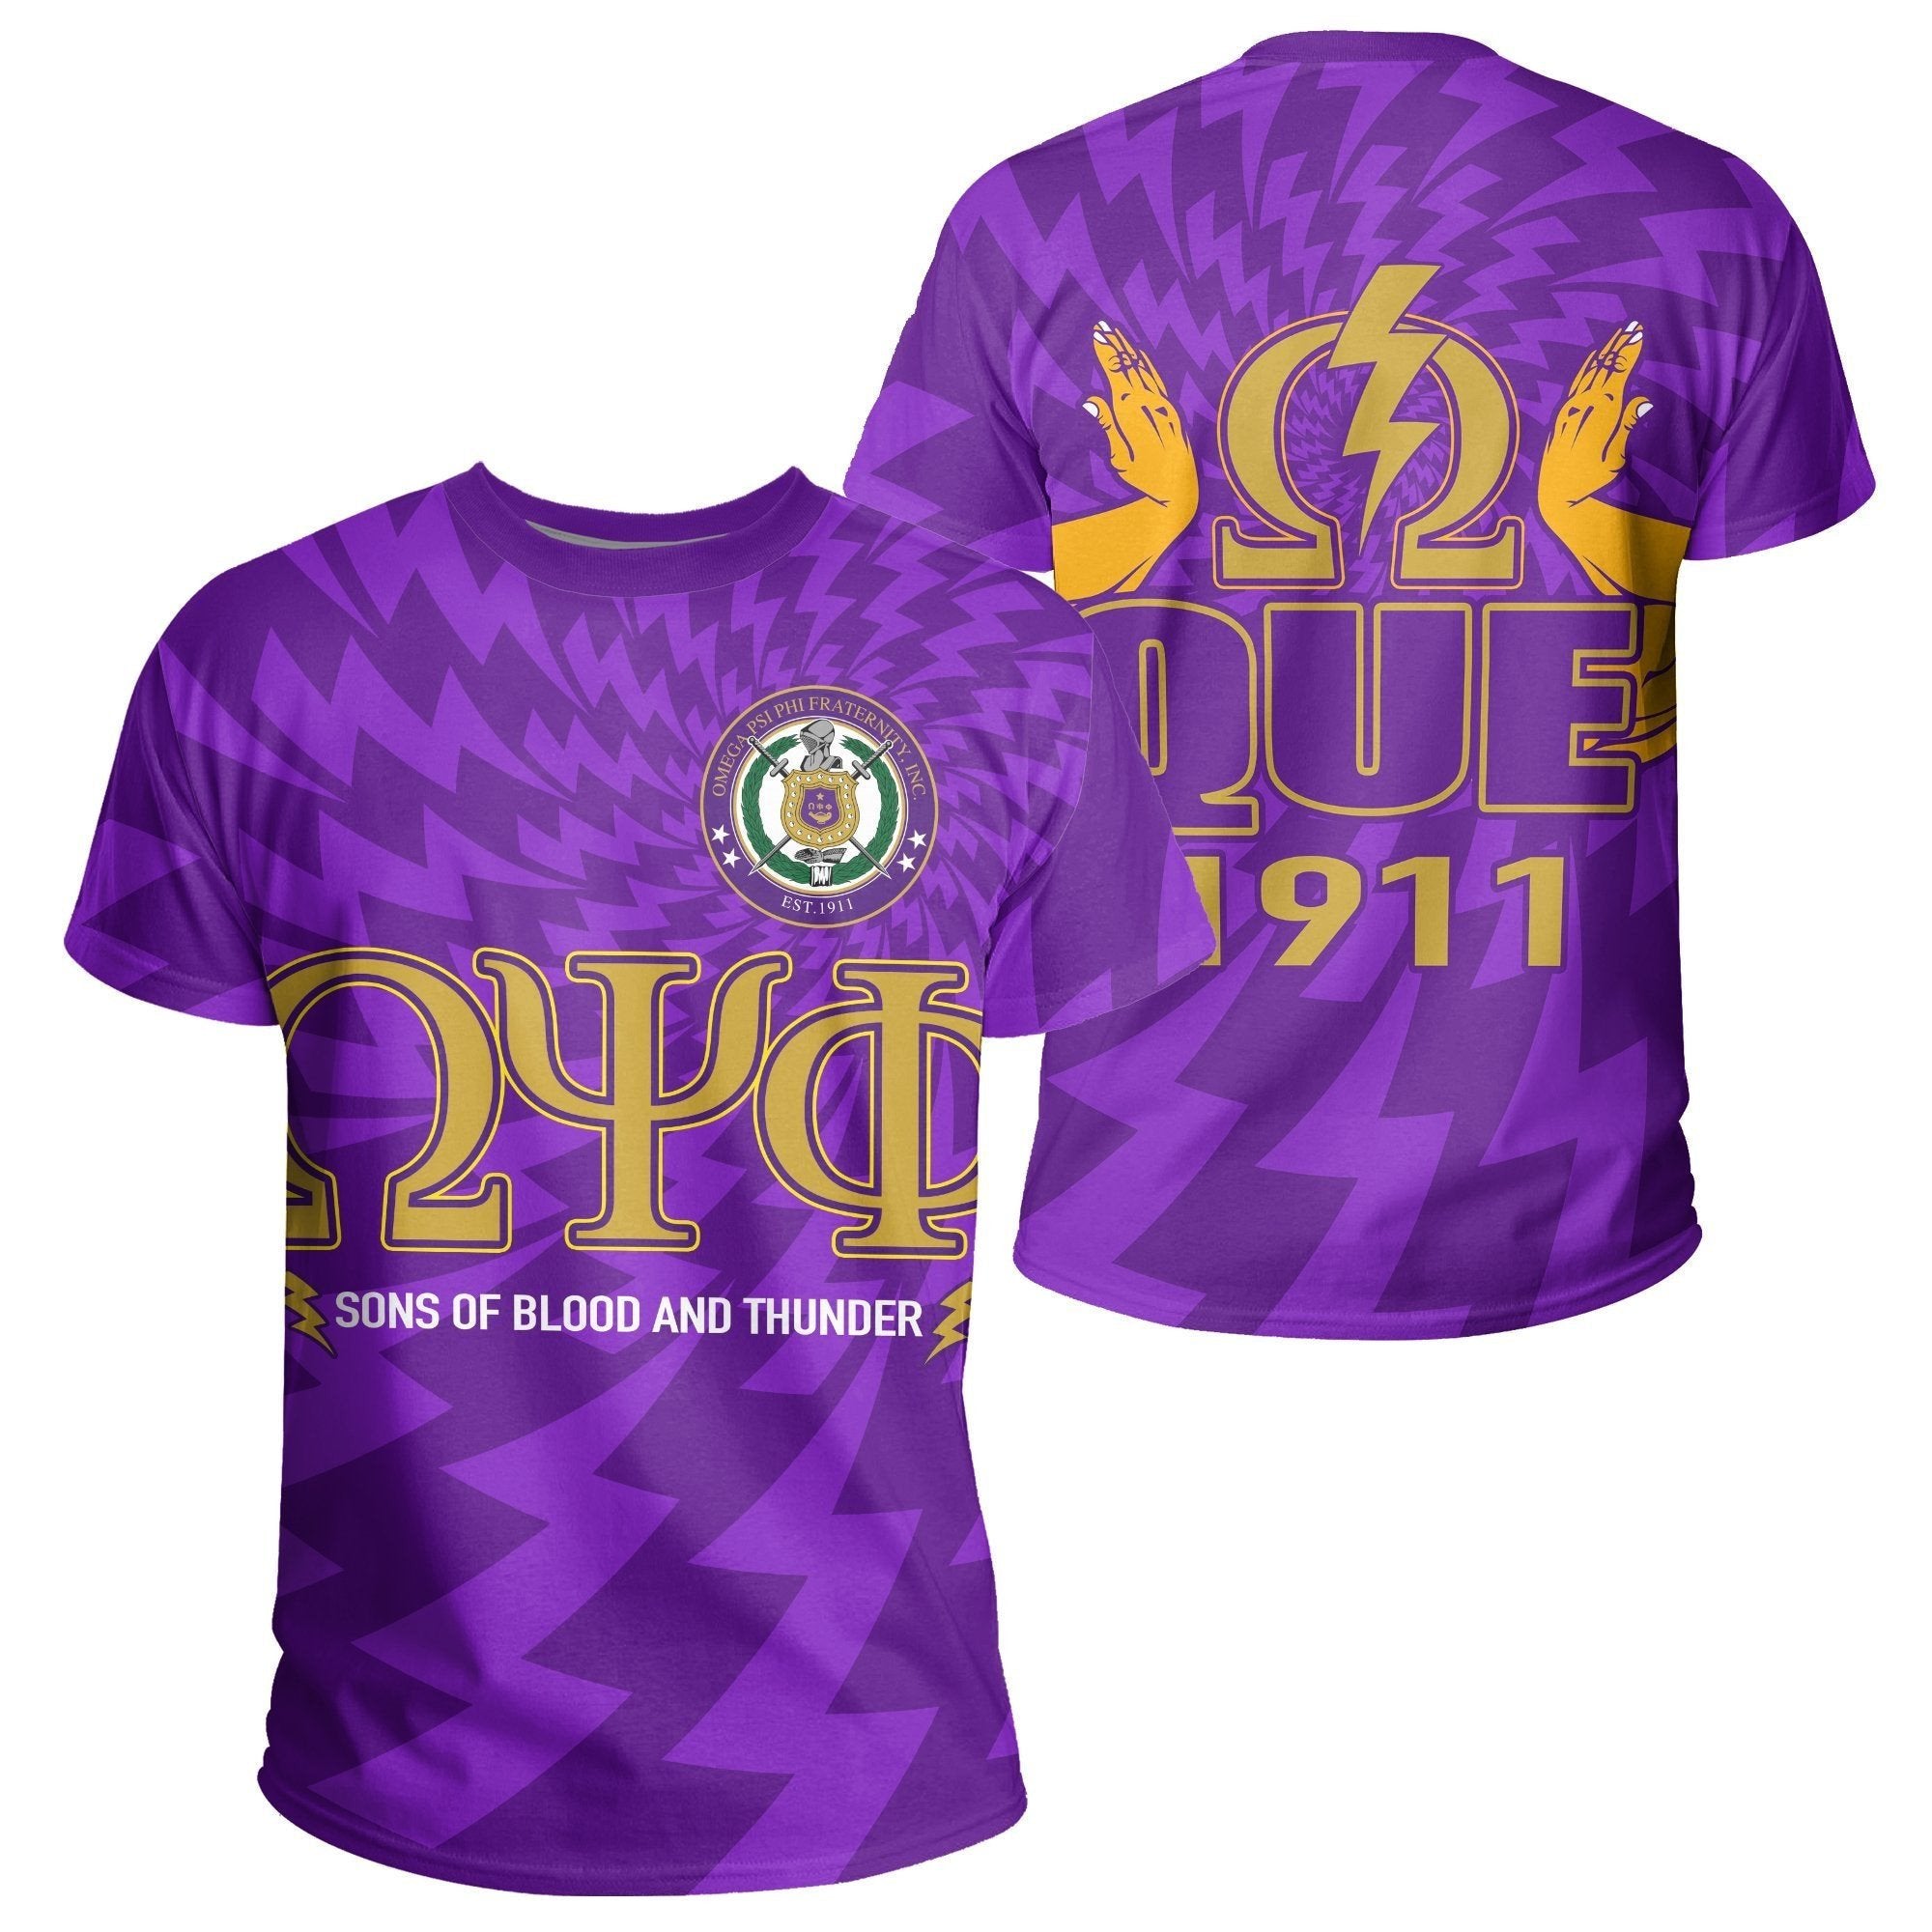 Fraternity Tshirt – Omega Psi Phi Que Tee